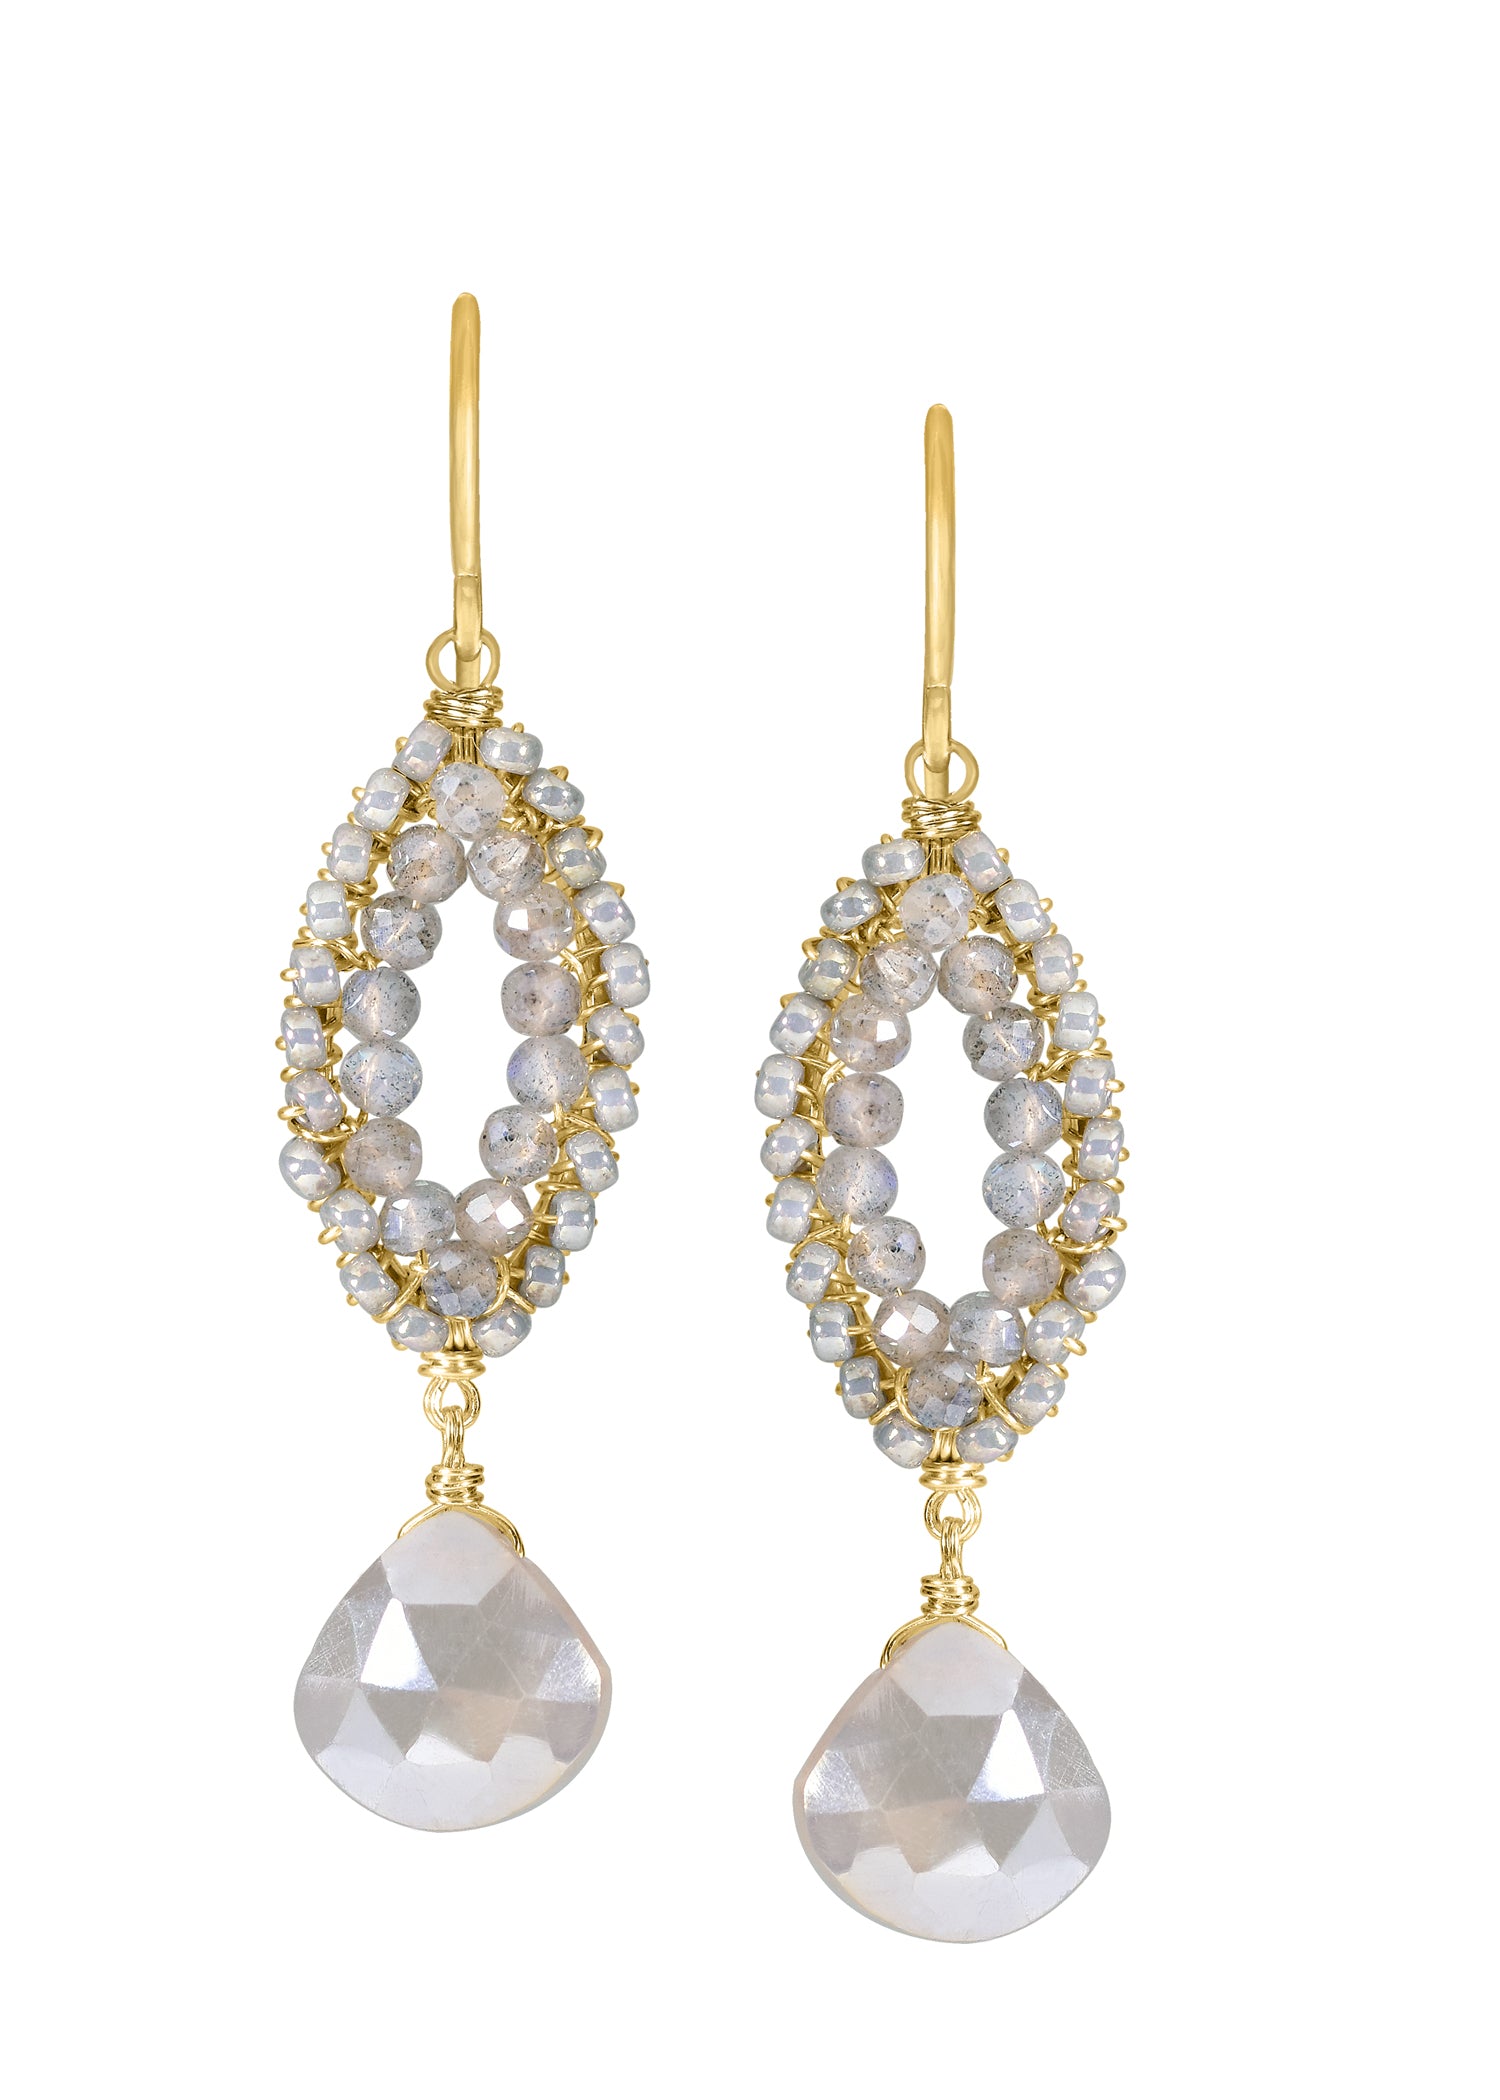 Labradorite Gray moonstone Seed beads 14k gold fill Earrings measure 1-5/8" in length (including the ear wires) and 3/8" in width at the widest point Handmade in our Los Angeles studio